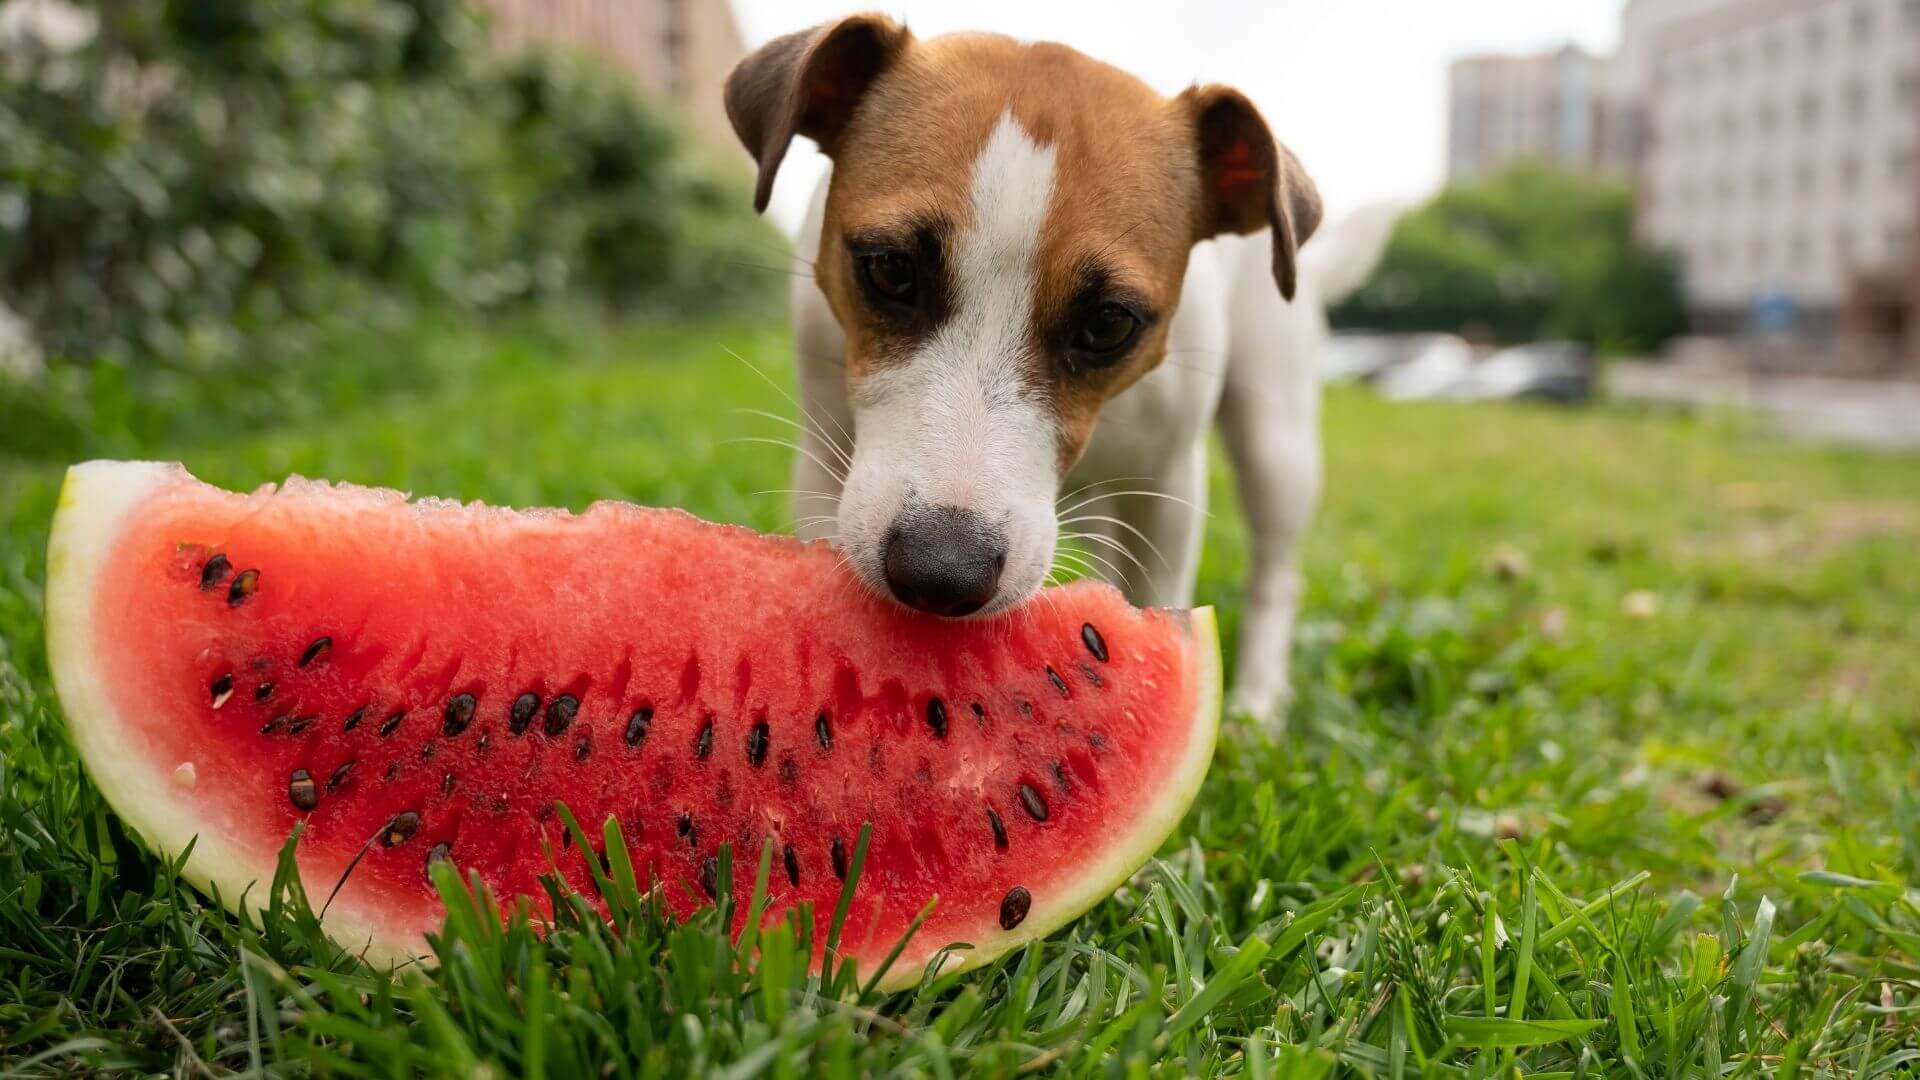 How Can Watermelon Energize Up Dogs?